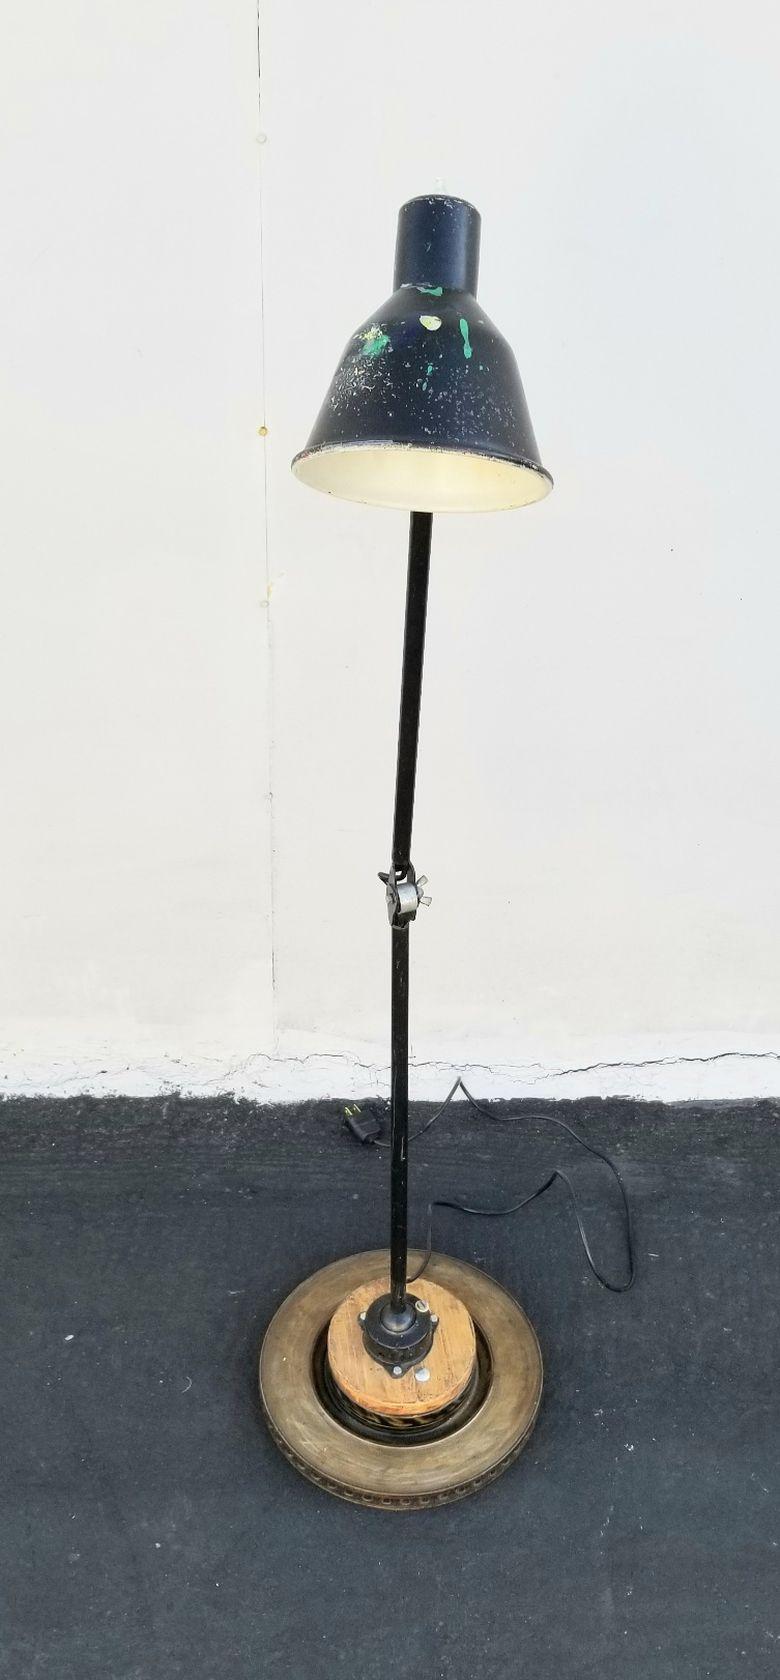 Pair of Industrial floor lamps buy Gimo Fero. Floor lamps are not identical but definitely a pair. Lamp stand is adjustable on the 3 placeless.